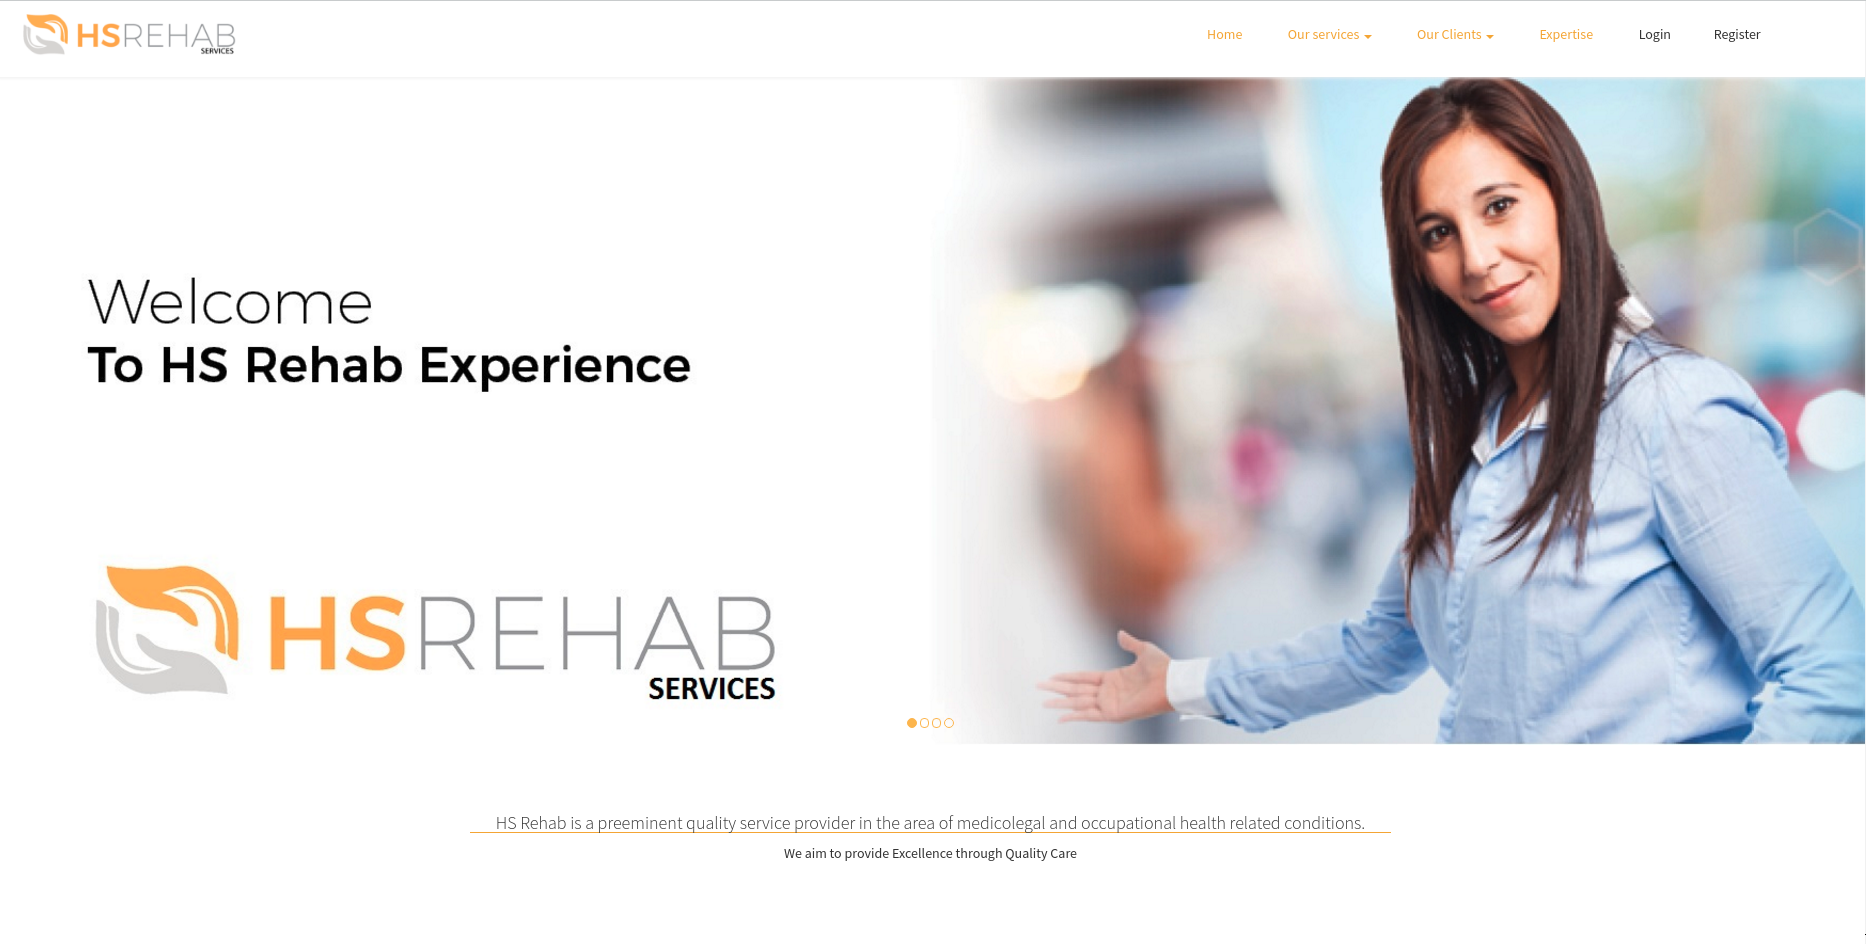 hsrehab front page